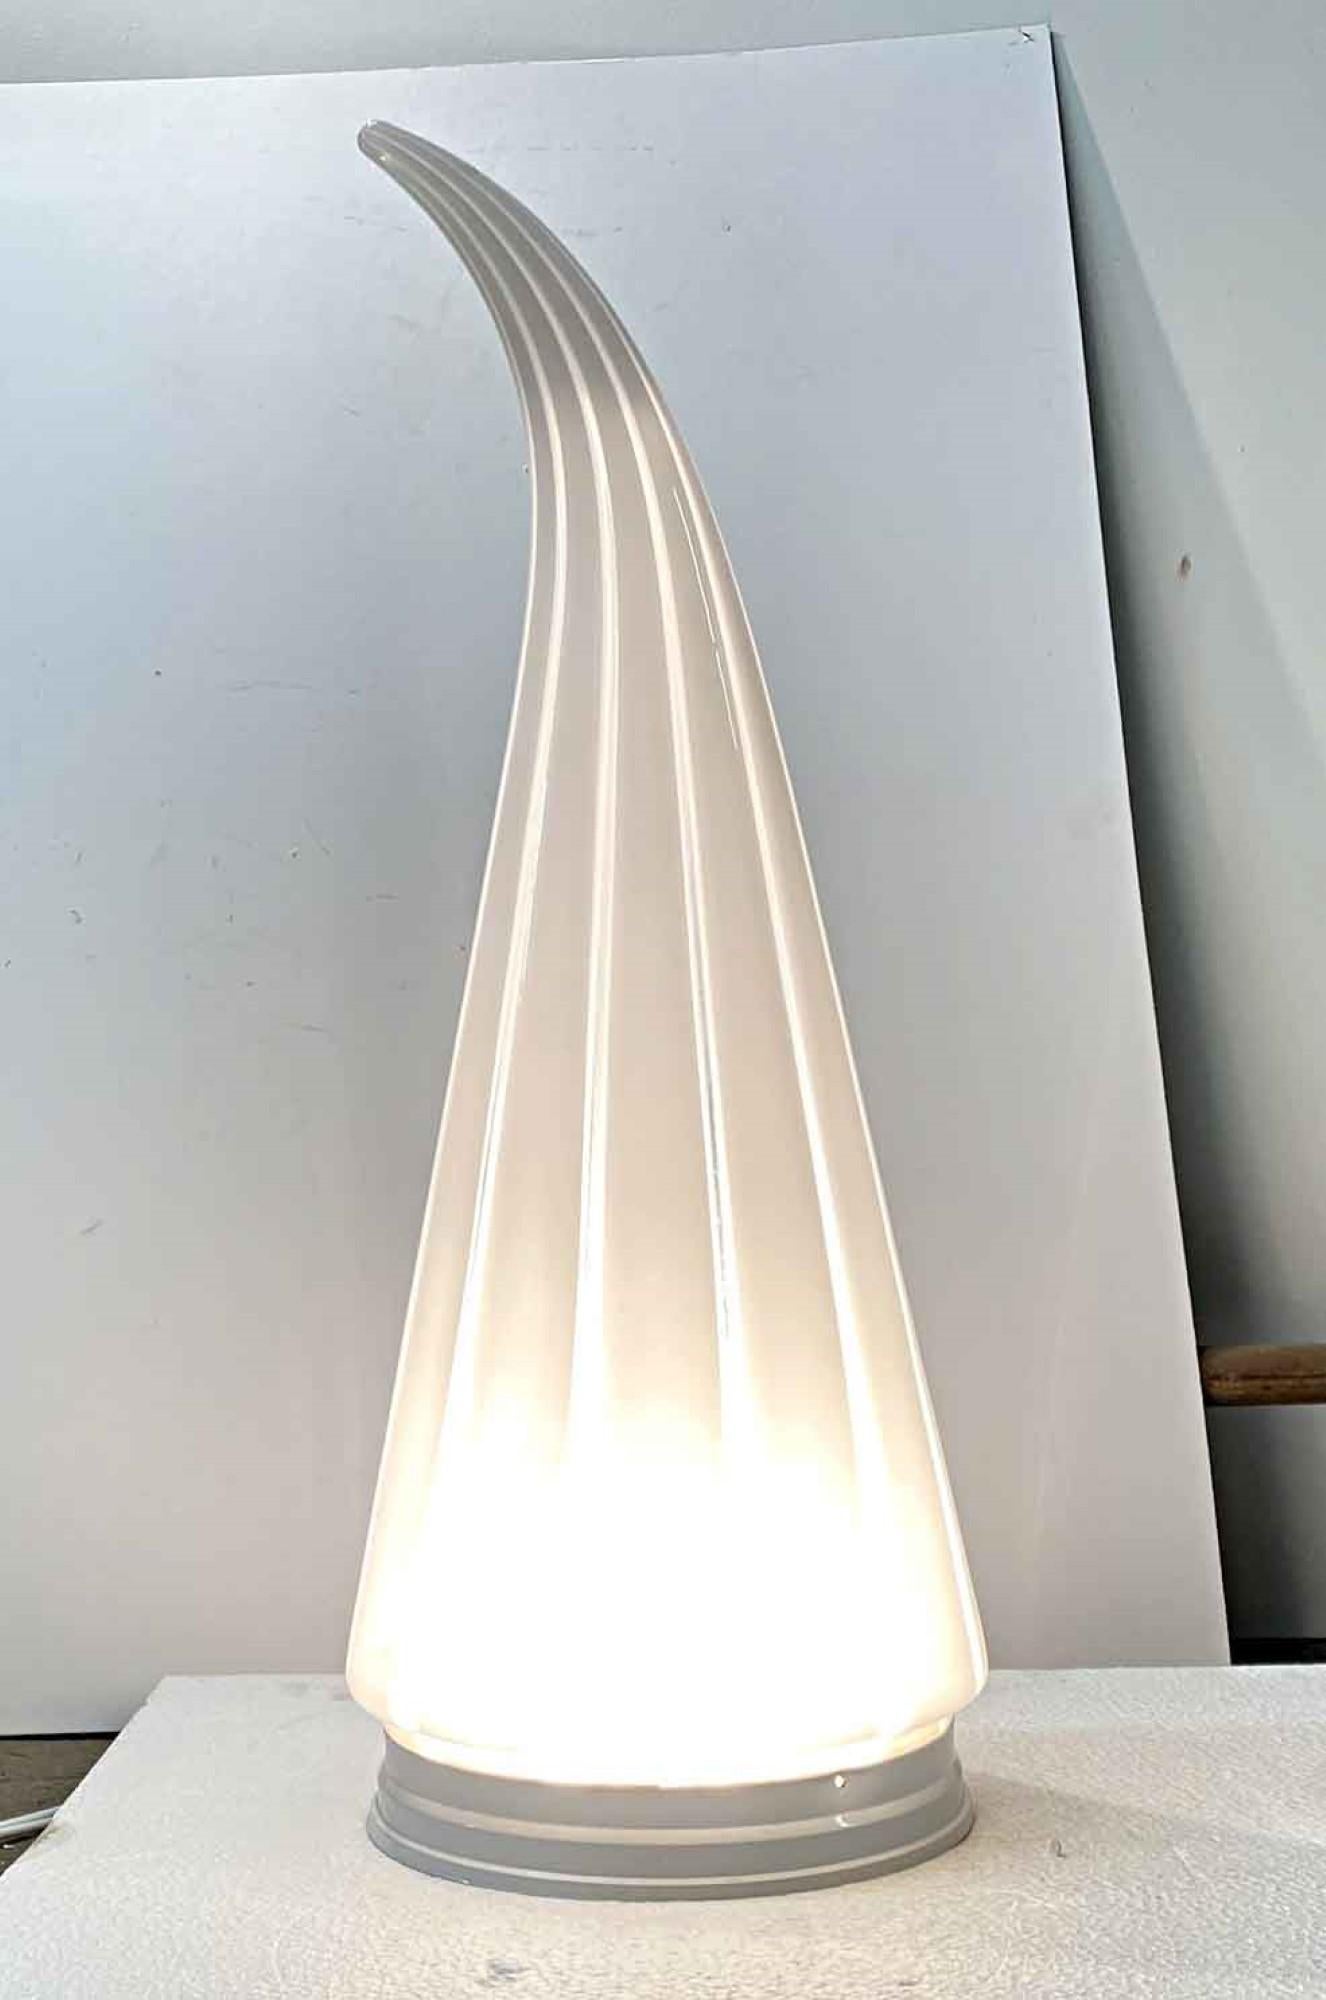 1980s striped Vetri Murano Mid-Century Modern glass table or floor lamp hand blown in Italy. It can be mounted on brass, nickel or a white enamel base per customer's specification. Accepts two standard light bulbs. Cleaned and rewired. Small